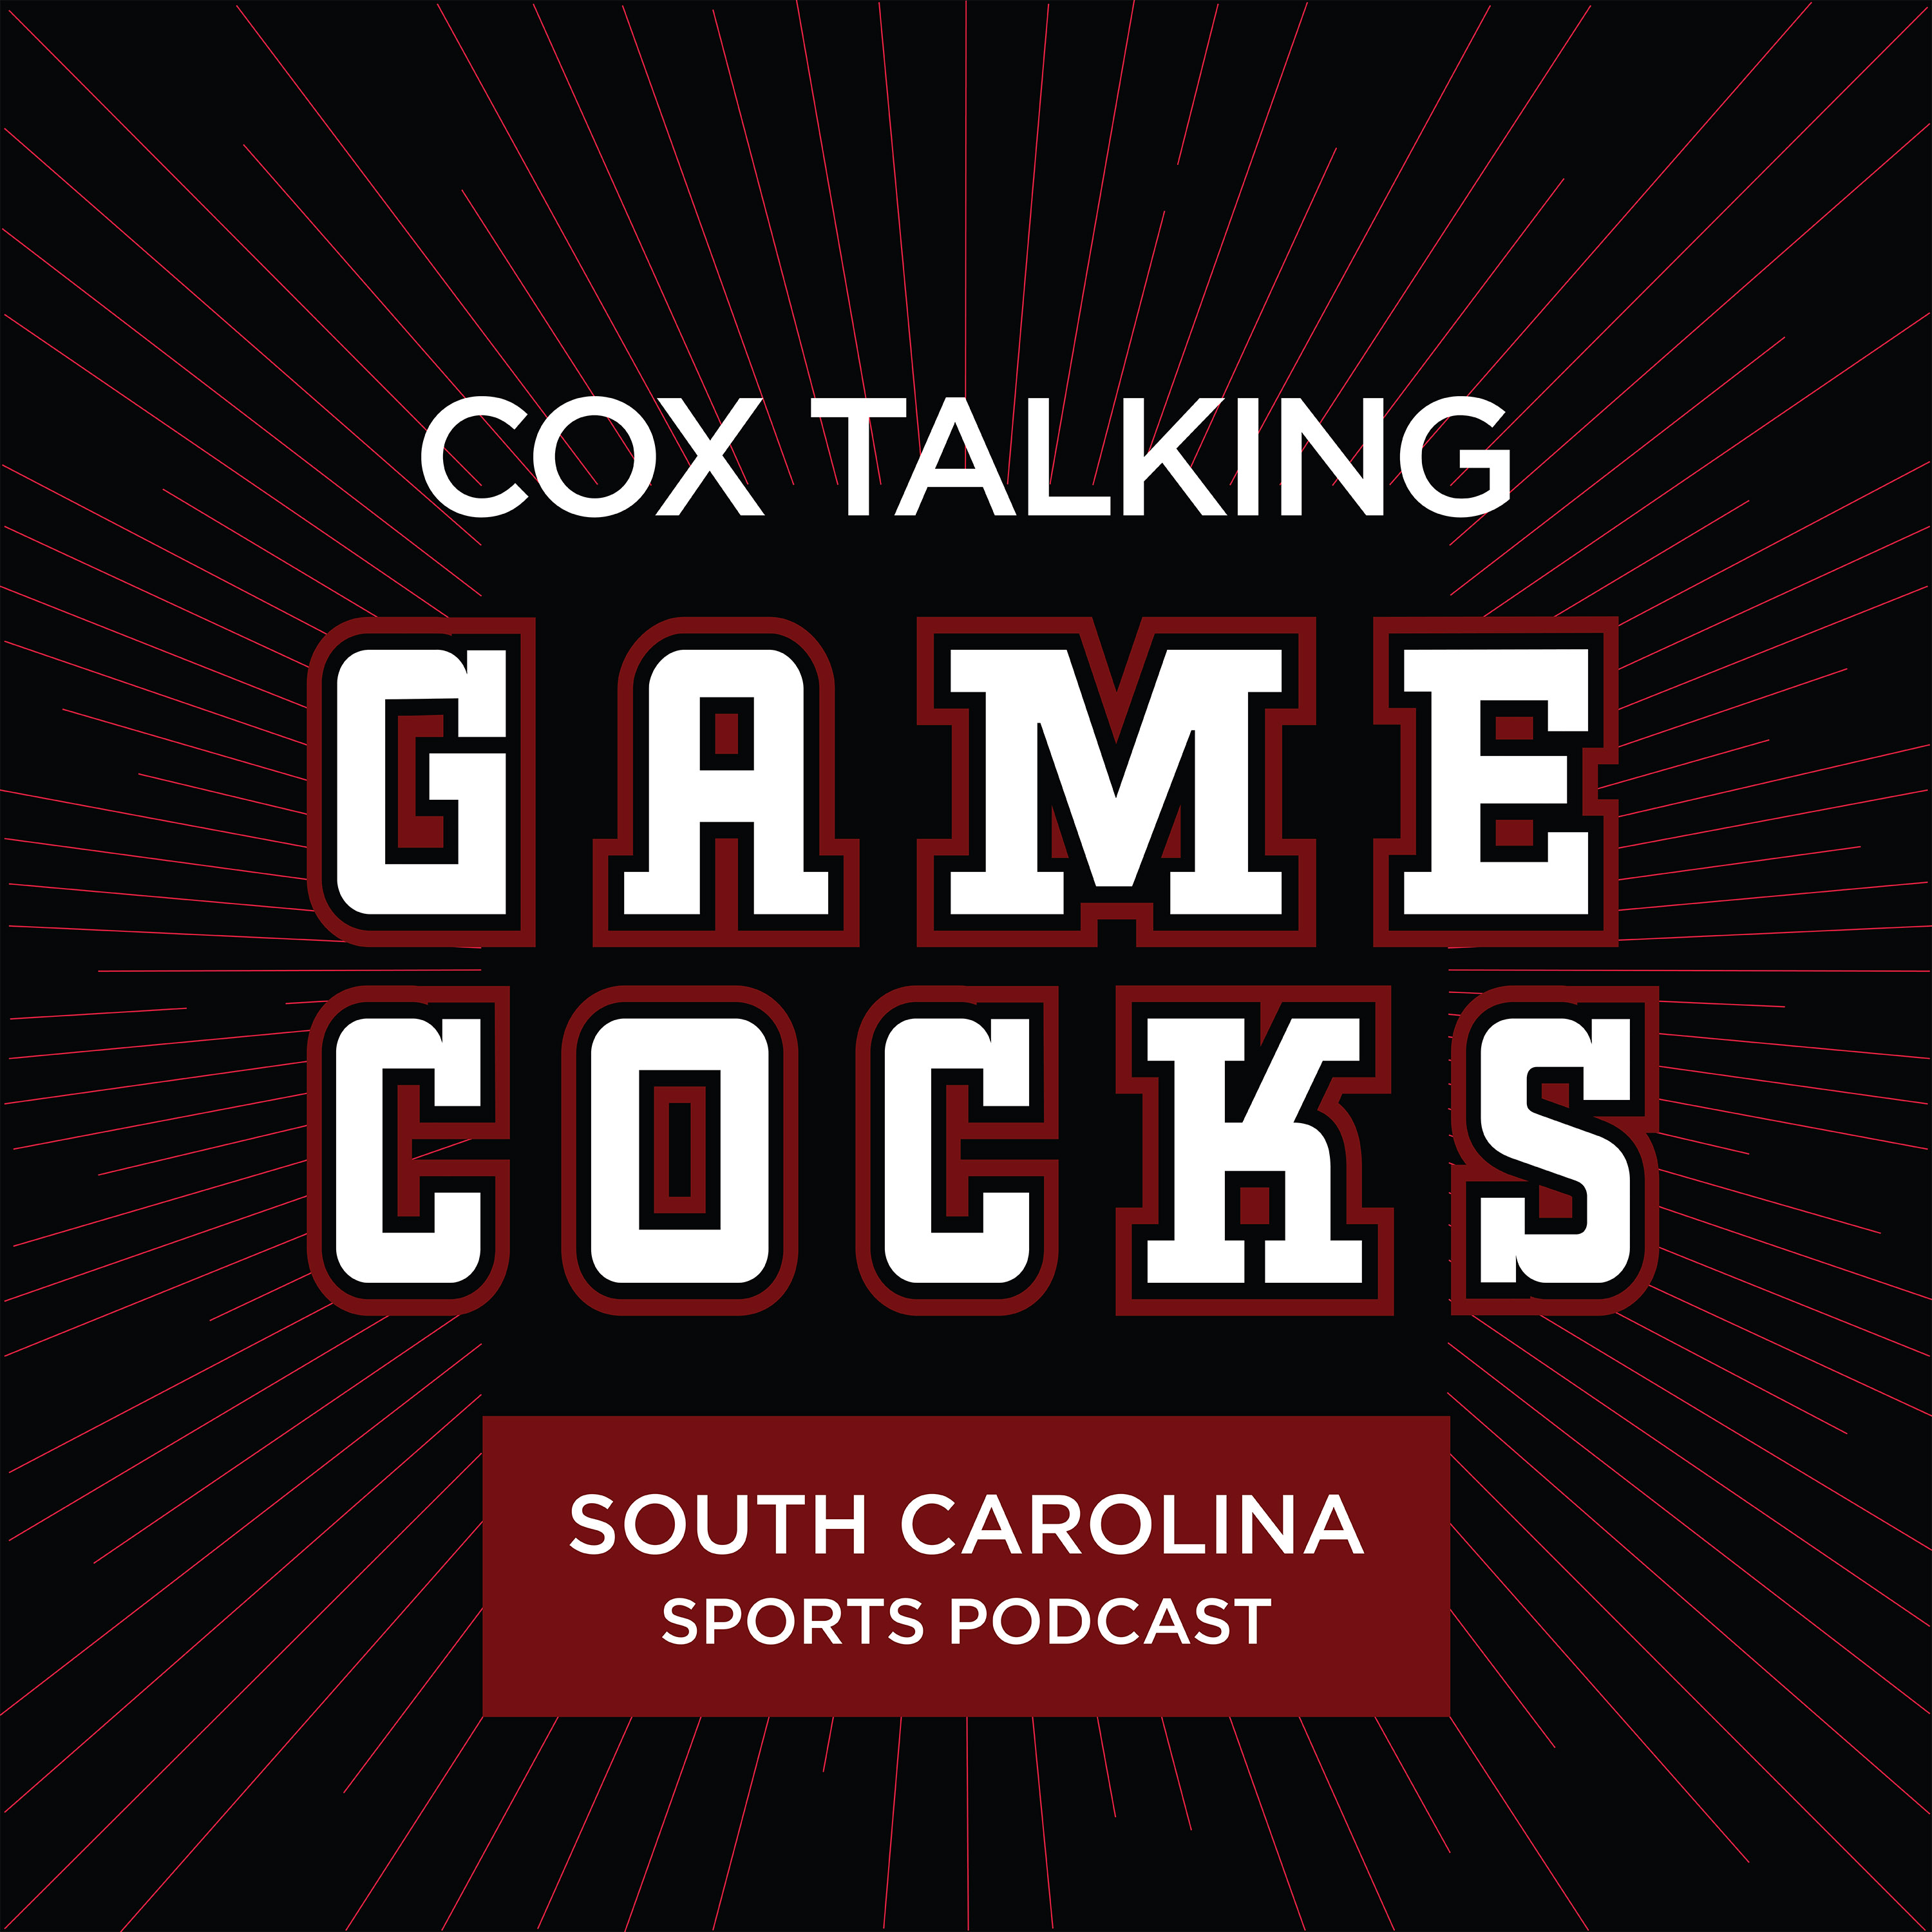 Gamecocks Back in Action Against UF: Pregame Analysis + Athletics Weekly Review & Six Pack of Picks